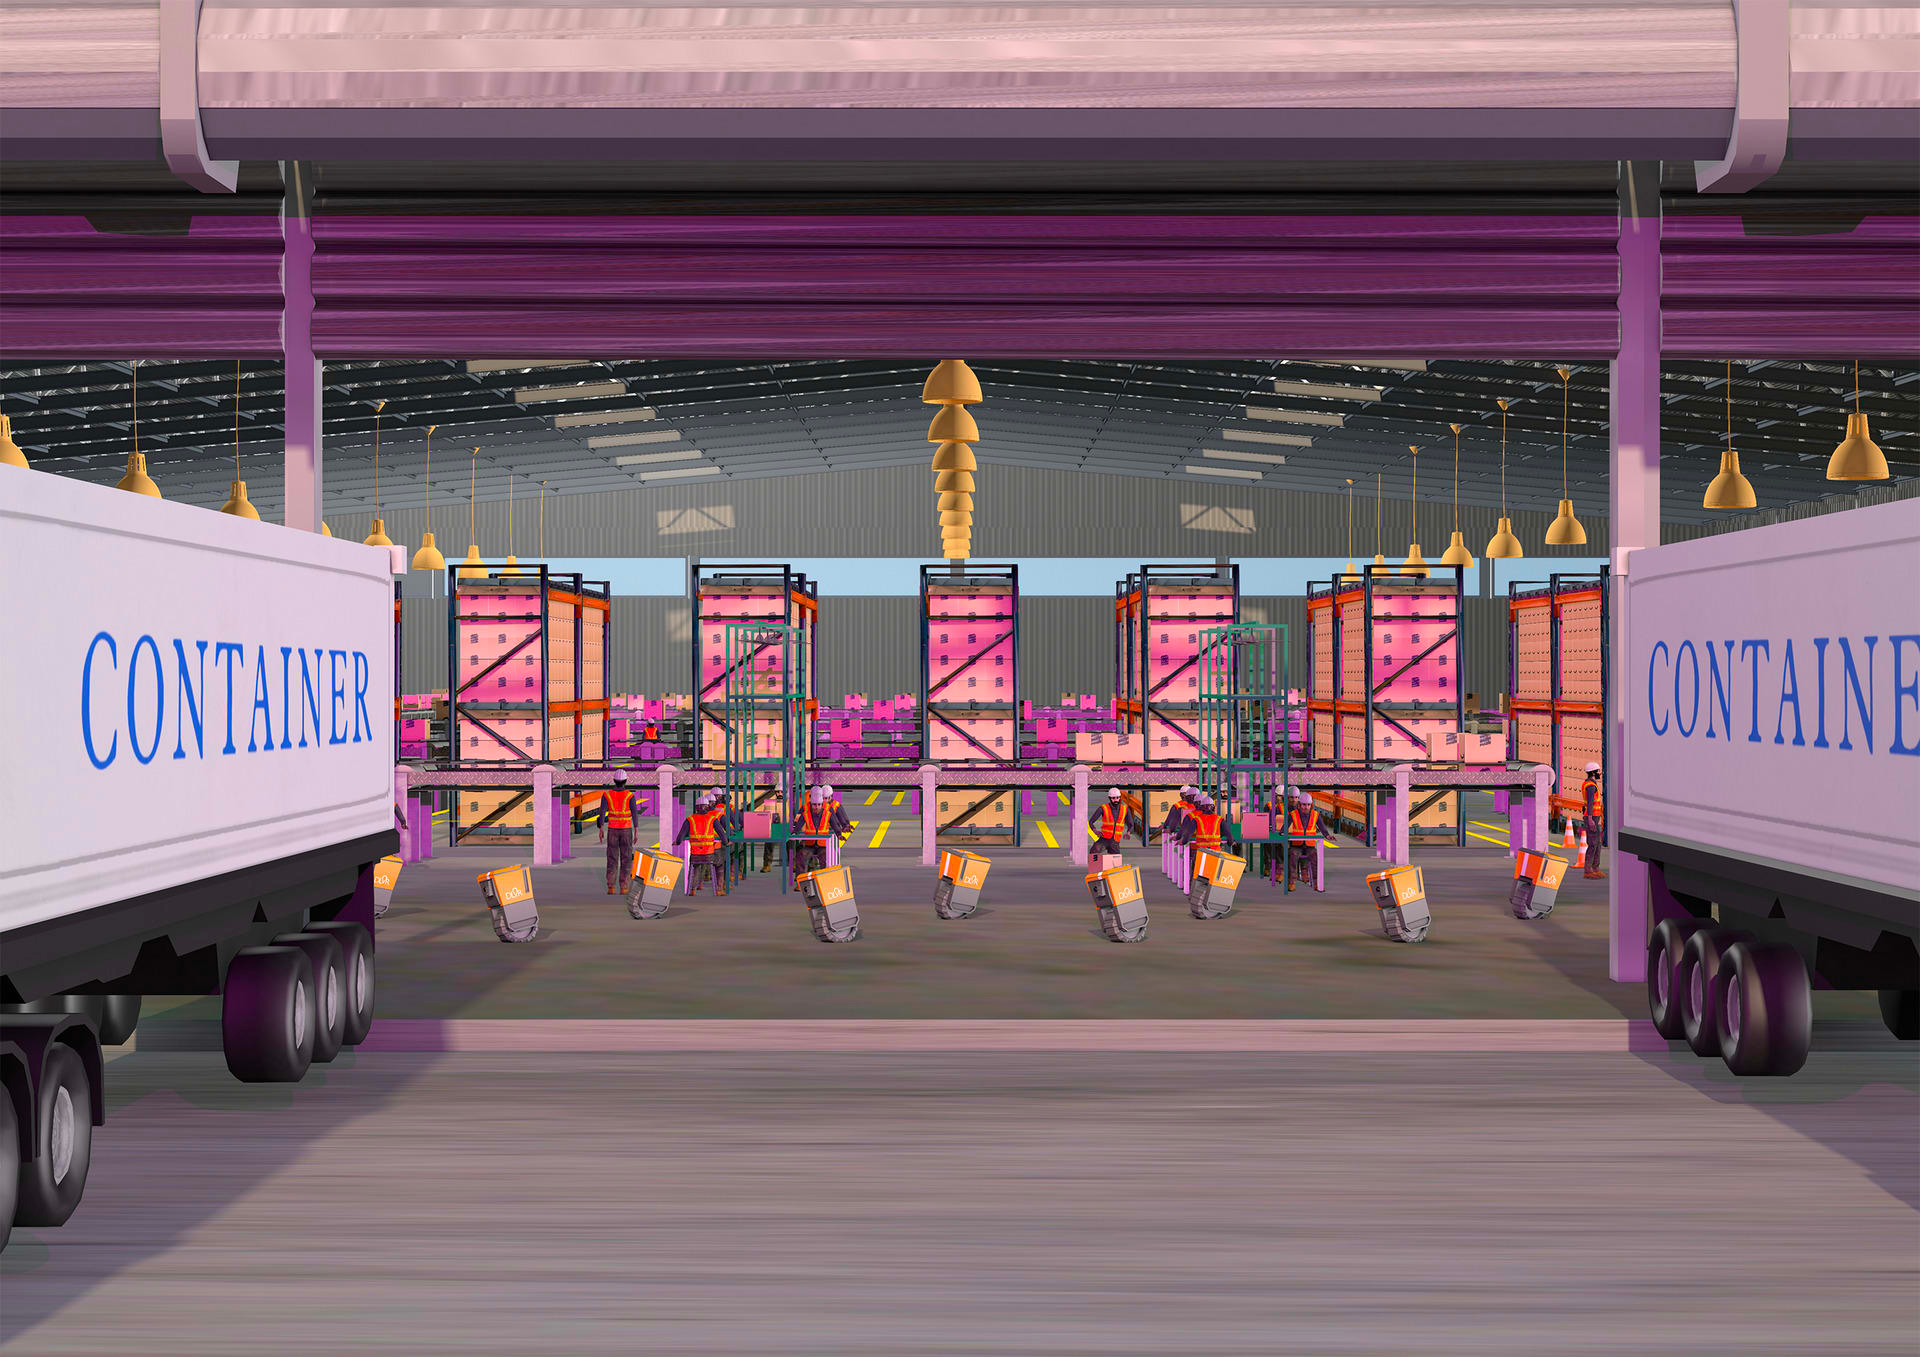 Image of a warehouse setting in a pink and purple hue, with two lorries flanking a group of people wearing high-viz waistcoats and hard hats, working, in the centre of the image.